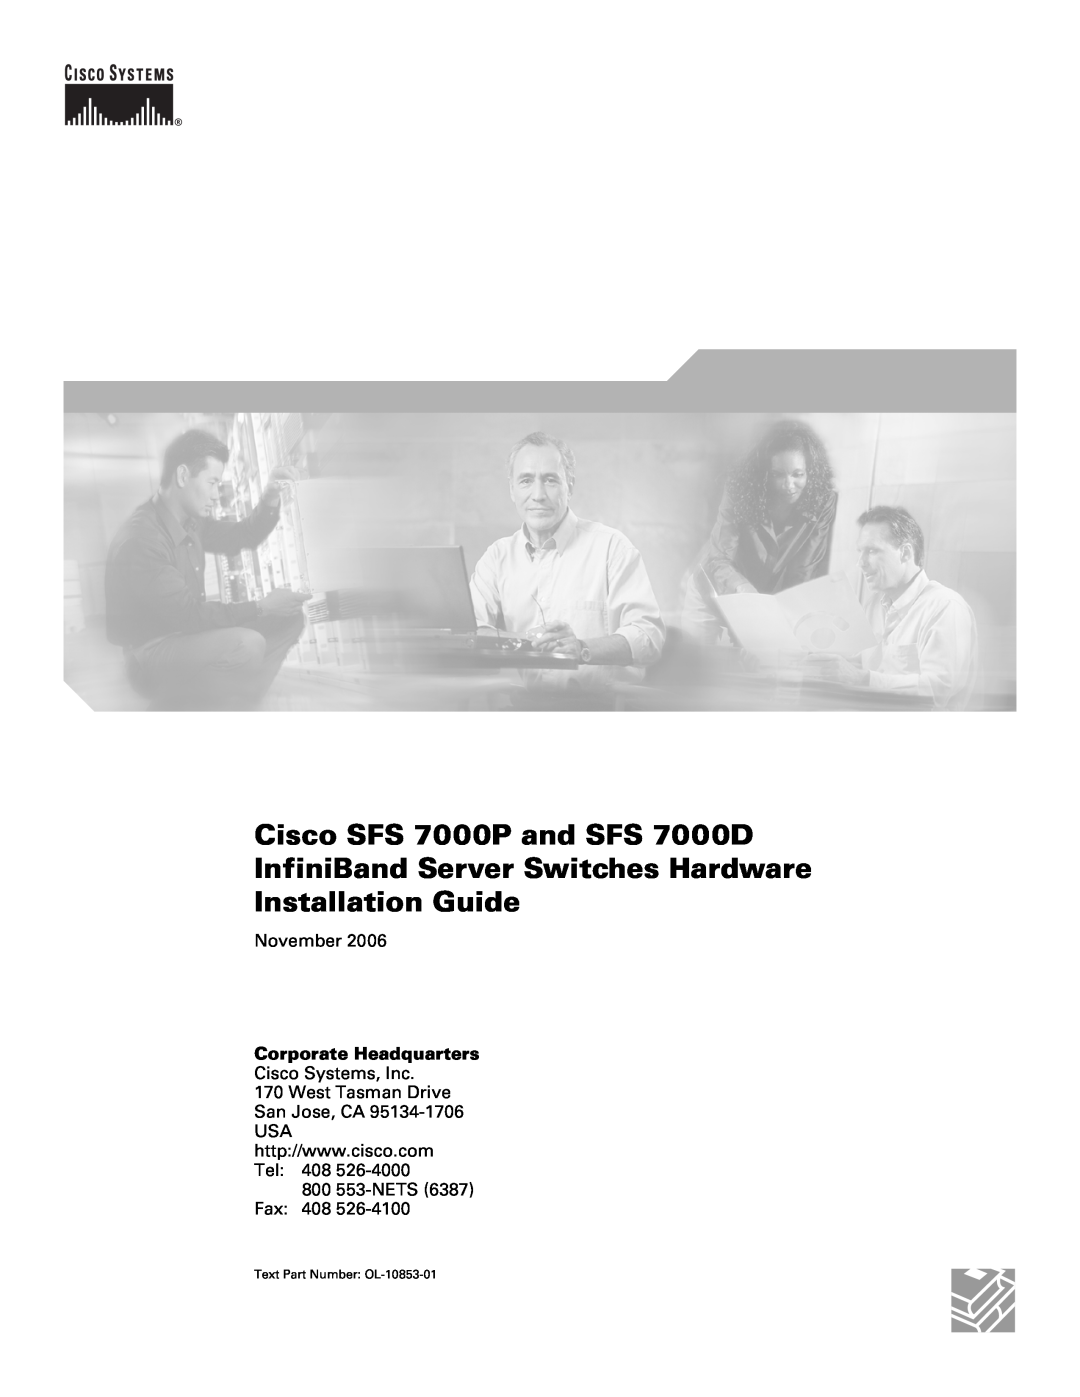 Cisco Systems manual Cisco SFS 7000P and SFS 7000D InfiniBand Server Switches Hardware, Installation Guide, November 